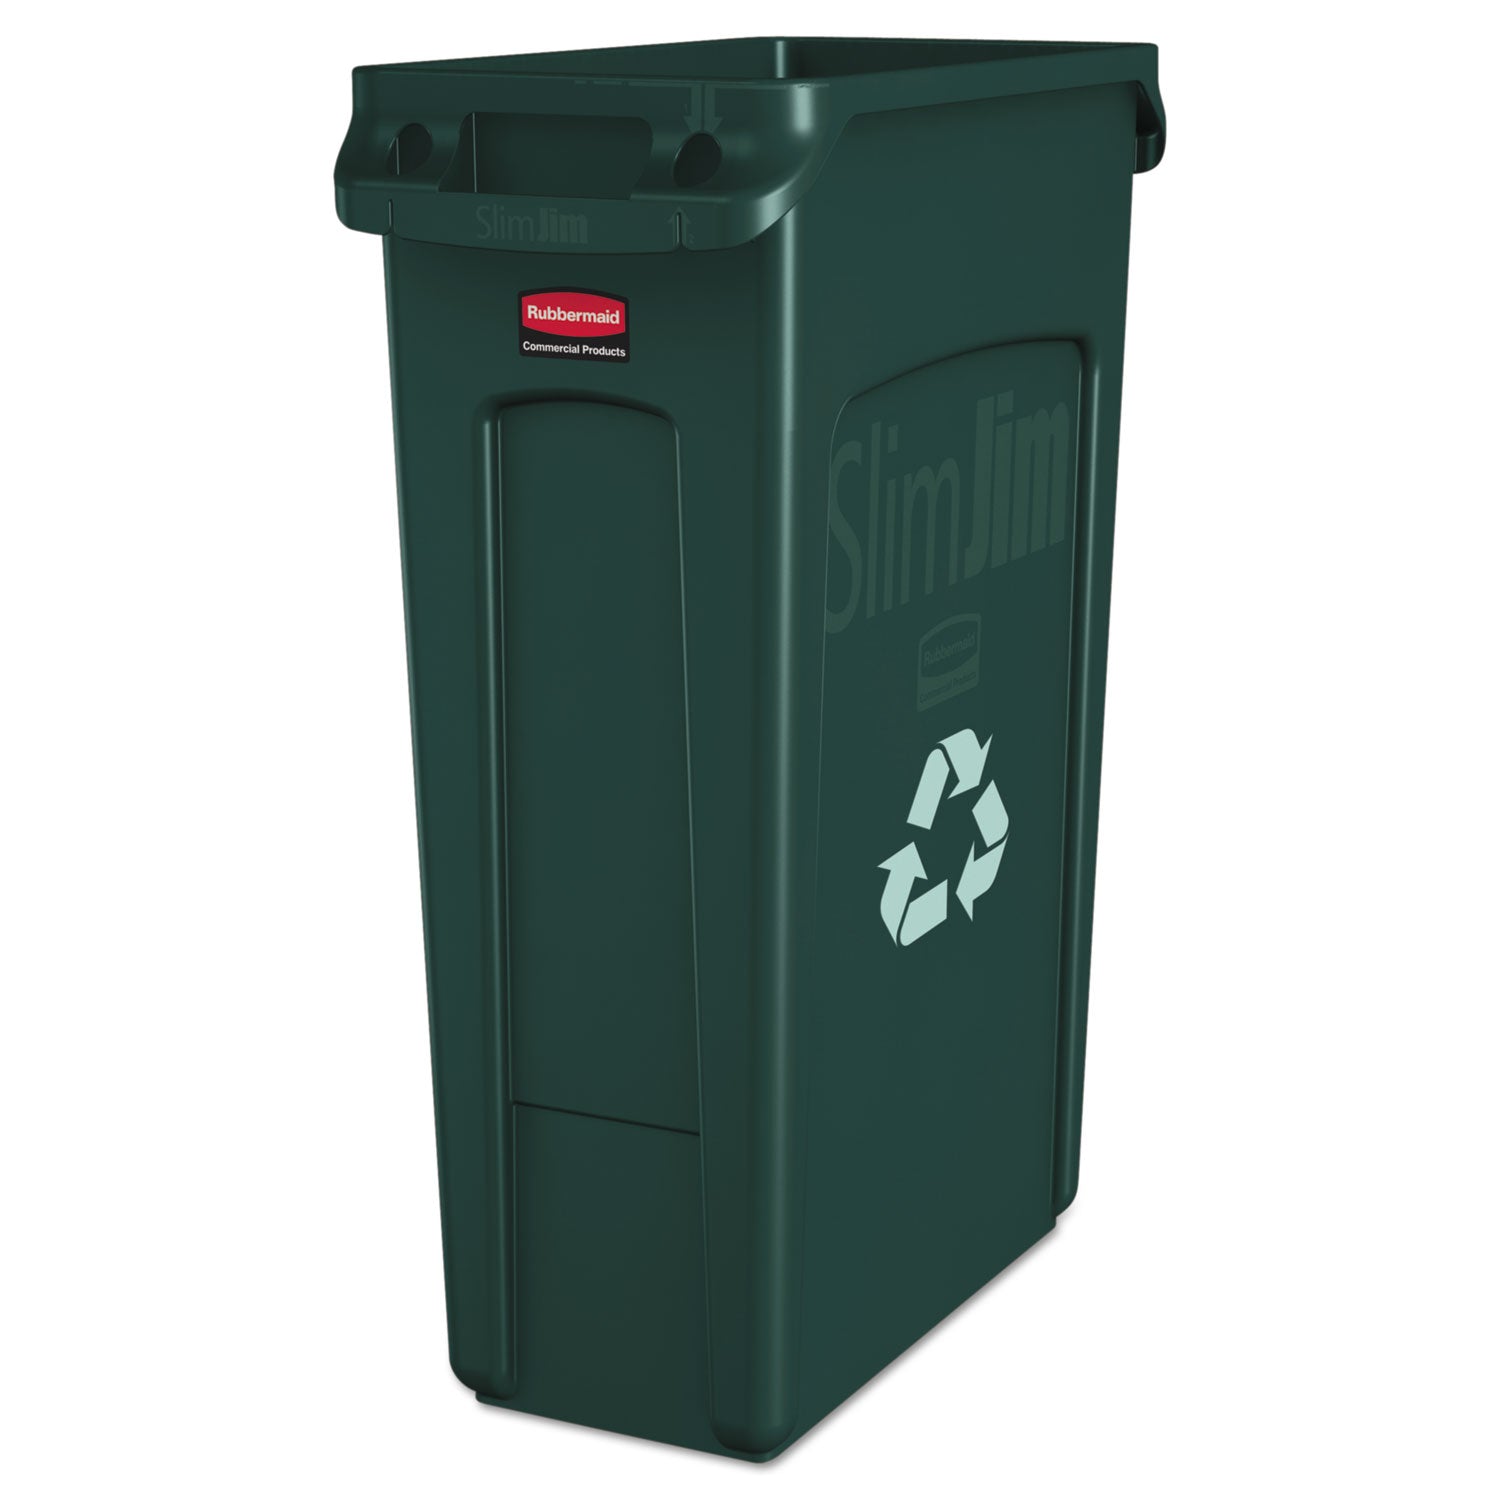 Slim Jim Plastic Recycling Container with Venting Channels, 23 gal, Plastic, Green - 